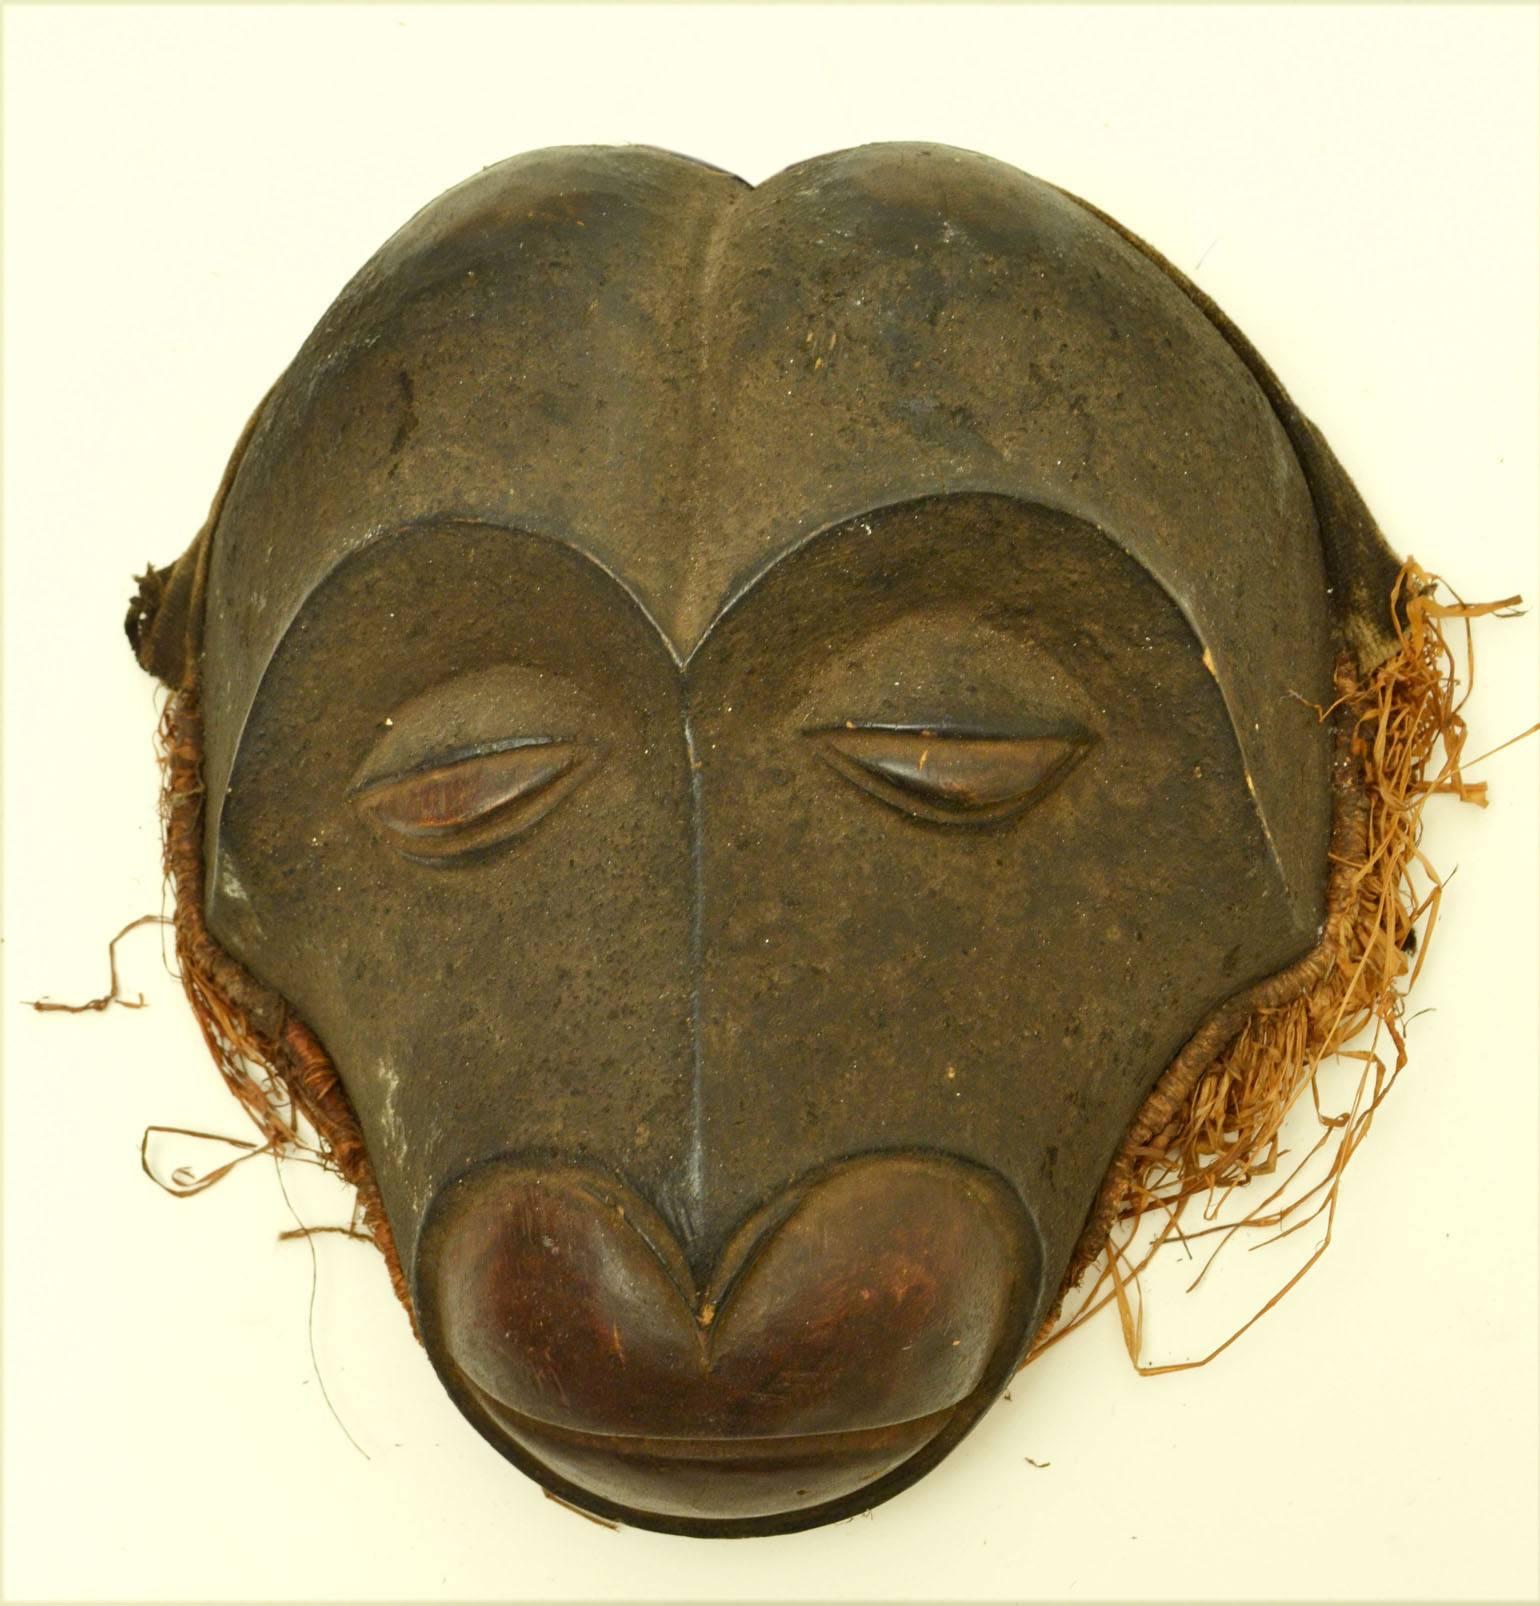 Original dance masks from the region of Cameroon and Congo carved in wood and edged with raffia.